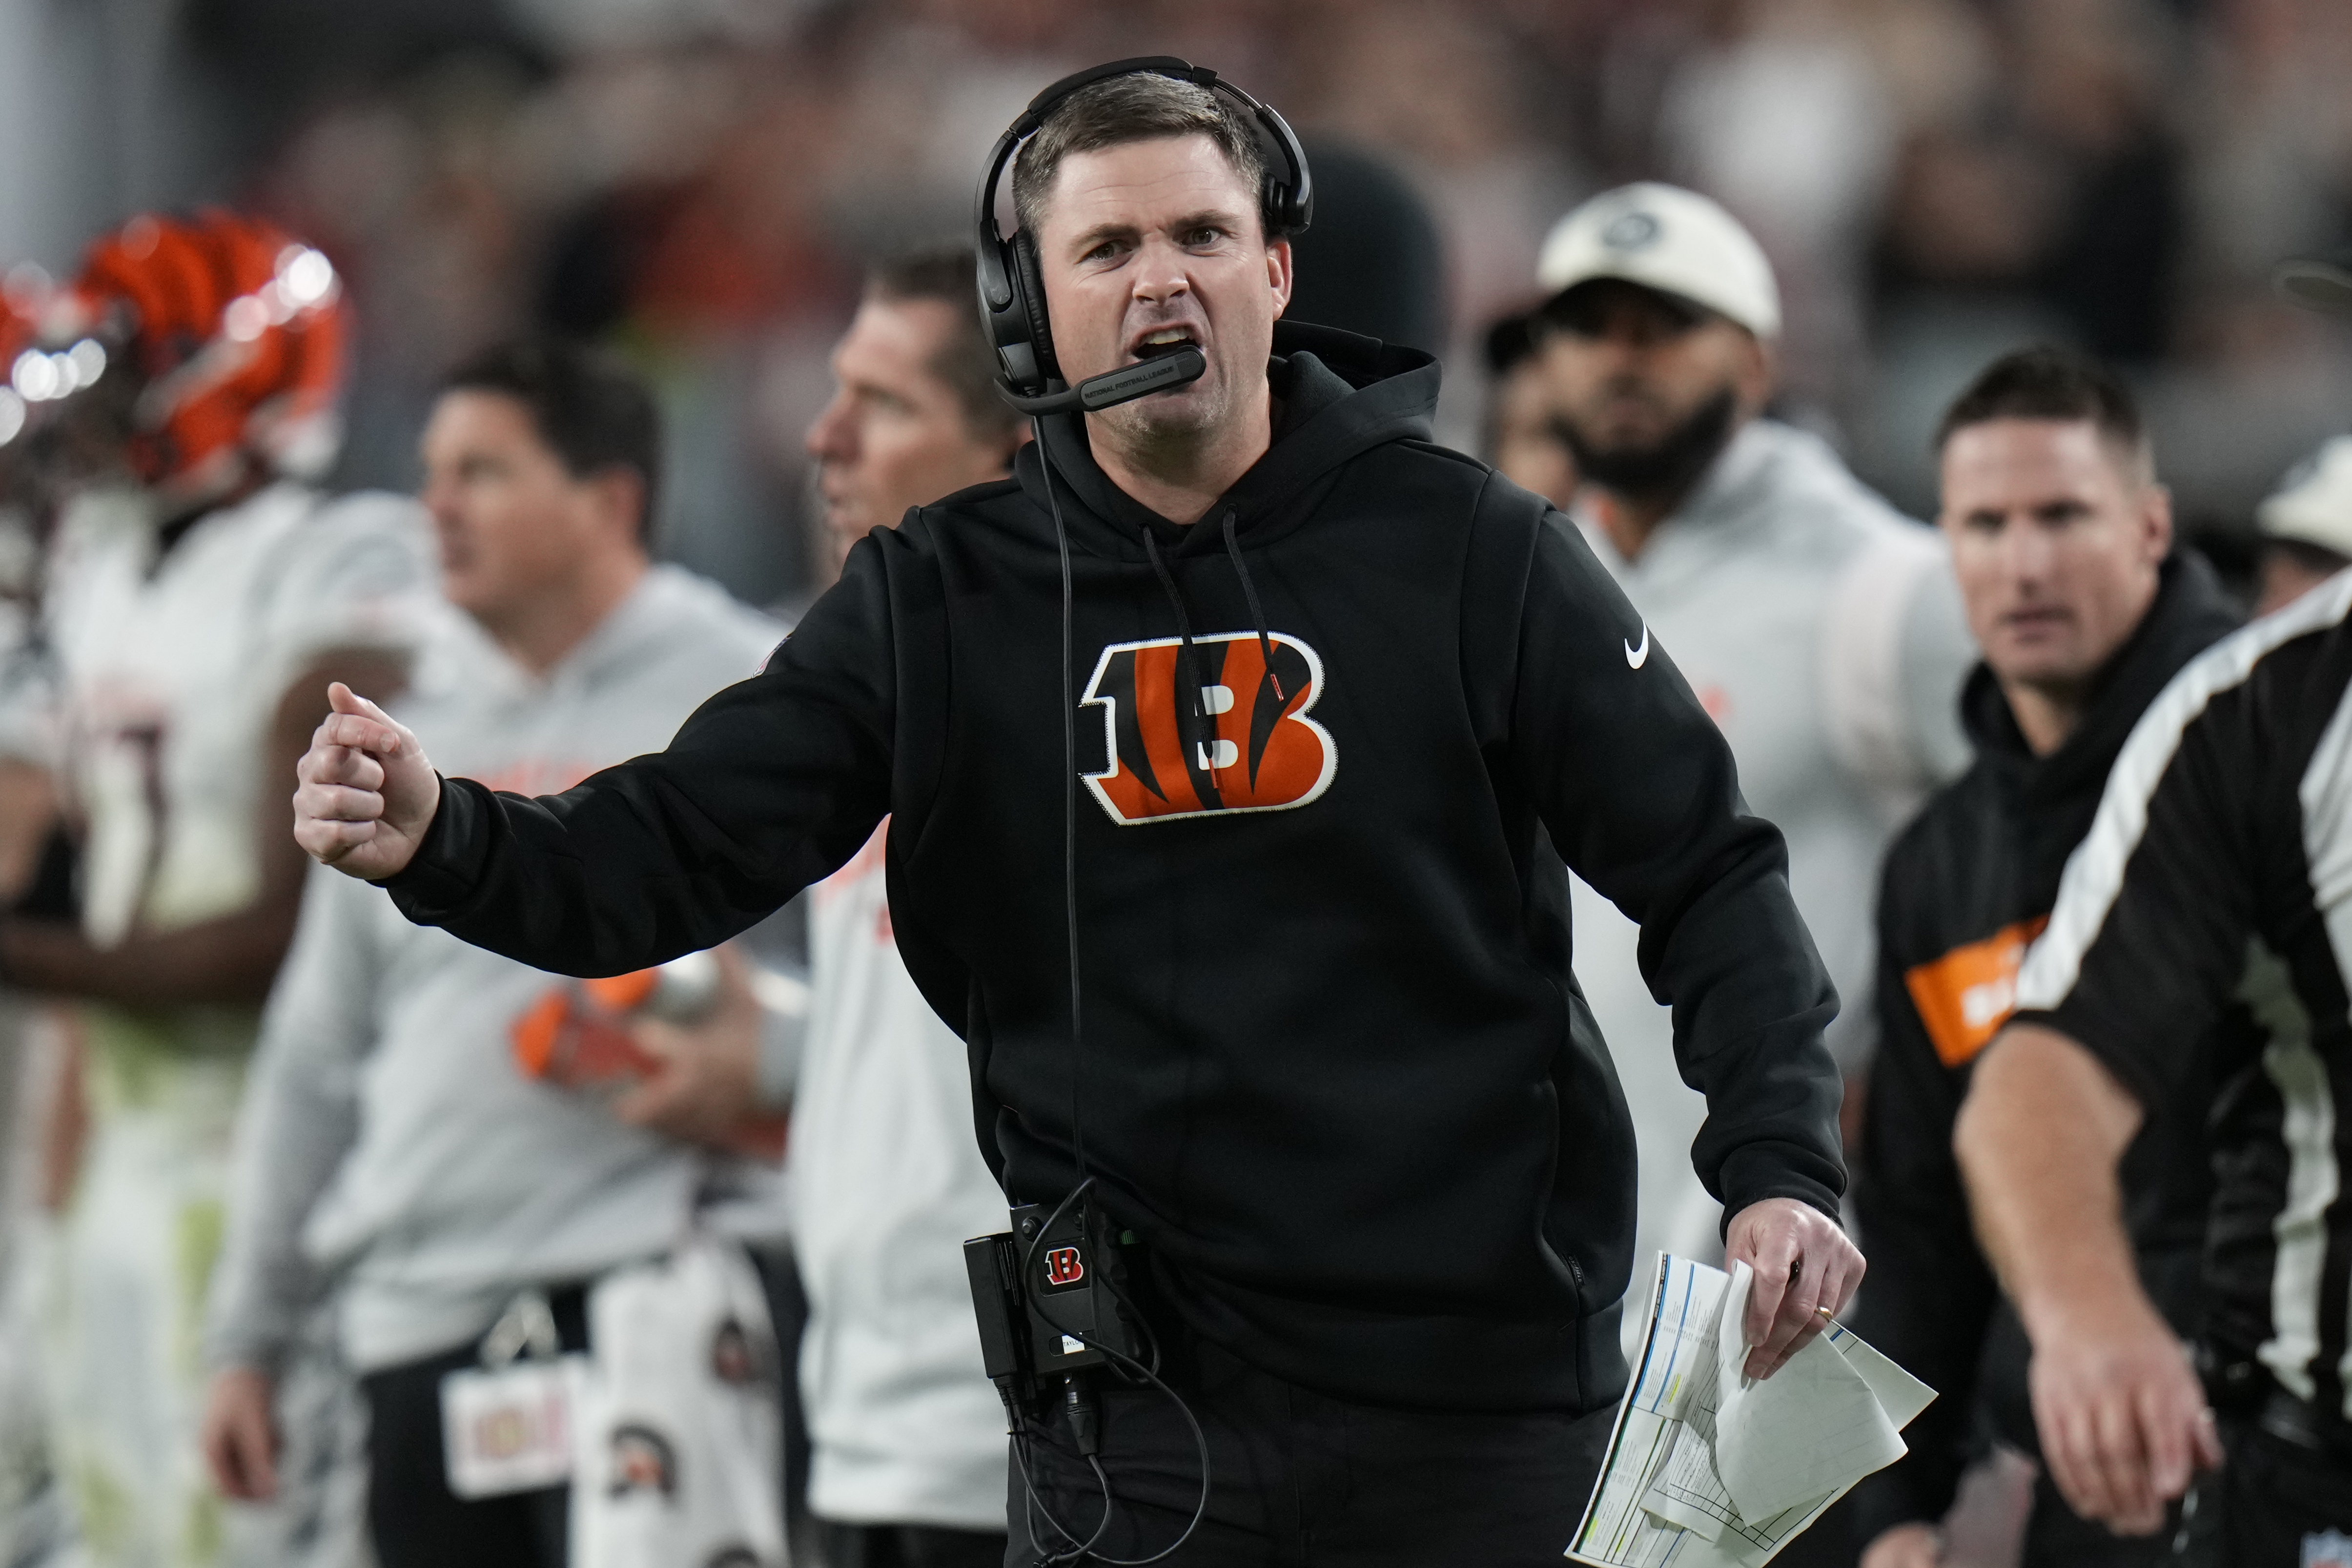 The Bengals' ultimate Super Bowl scouting report from every team they faced  this season 